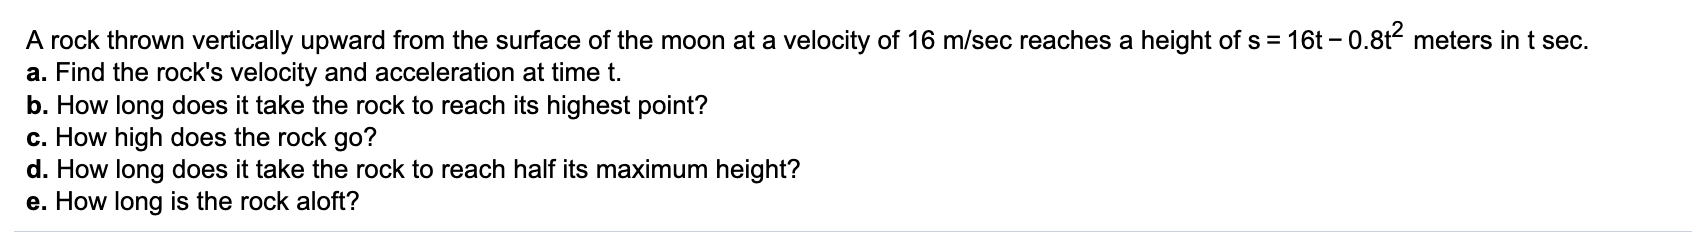 16t – 0.8t meters in t sec.
A rock thrown vertically upward from the surface of the moon at a velocity of 16 m/sec reaches a height of s =
a. Find the rock's velocity and acceleration at time t.
b. How long does it take the rock to reach its highest point?
c. How high does the rock go?
d. How long does it take the rock to reach half its maximum height?
e. How long is the rock aloft?
